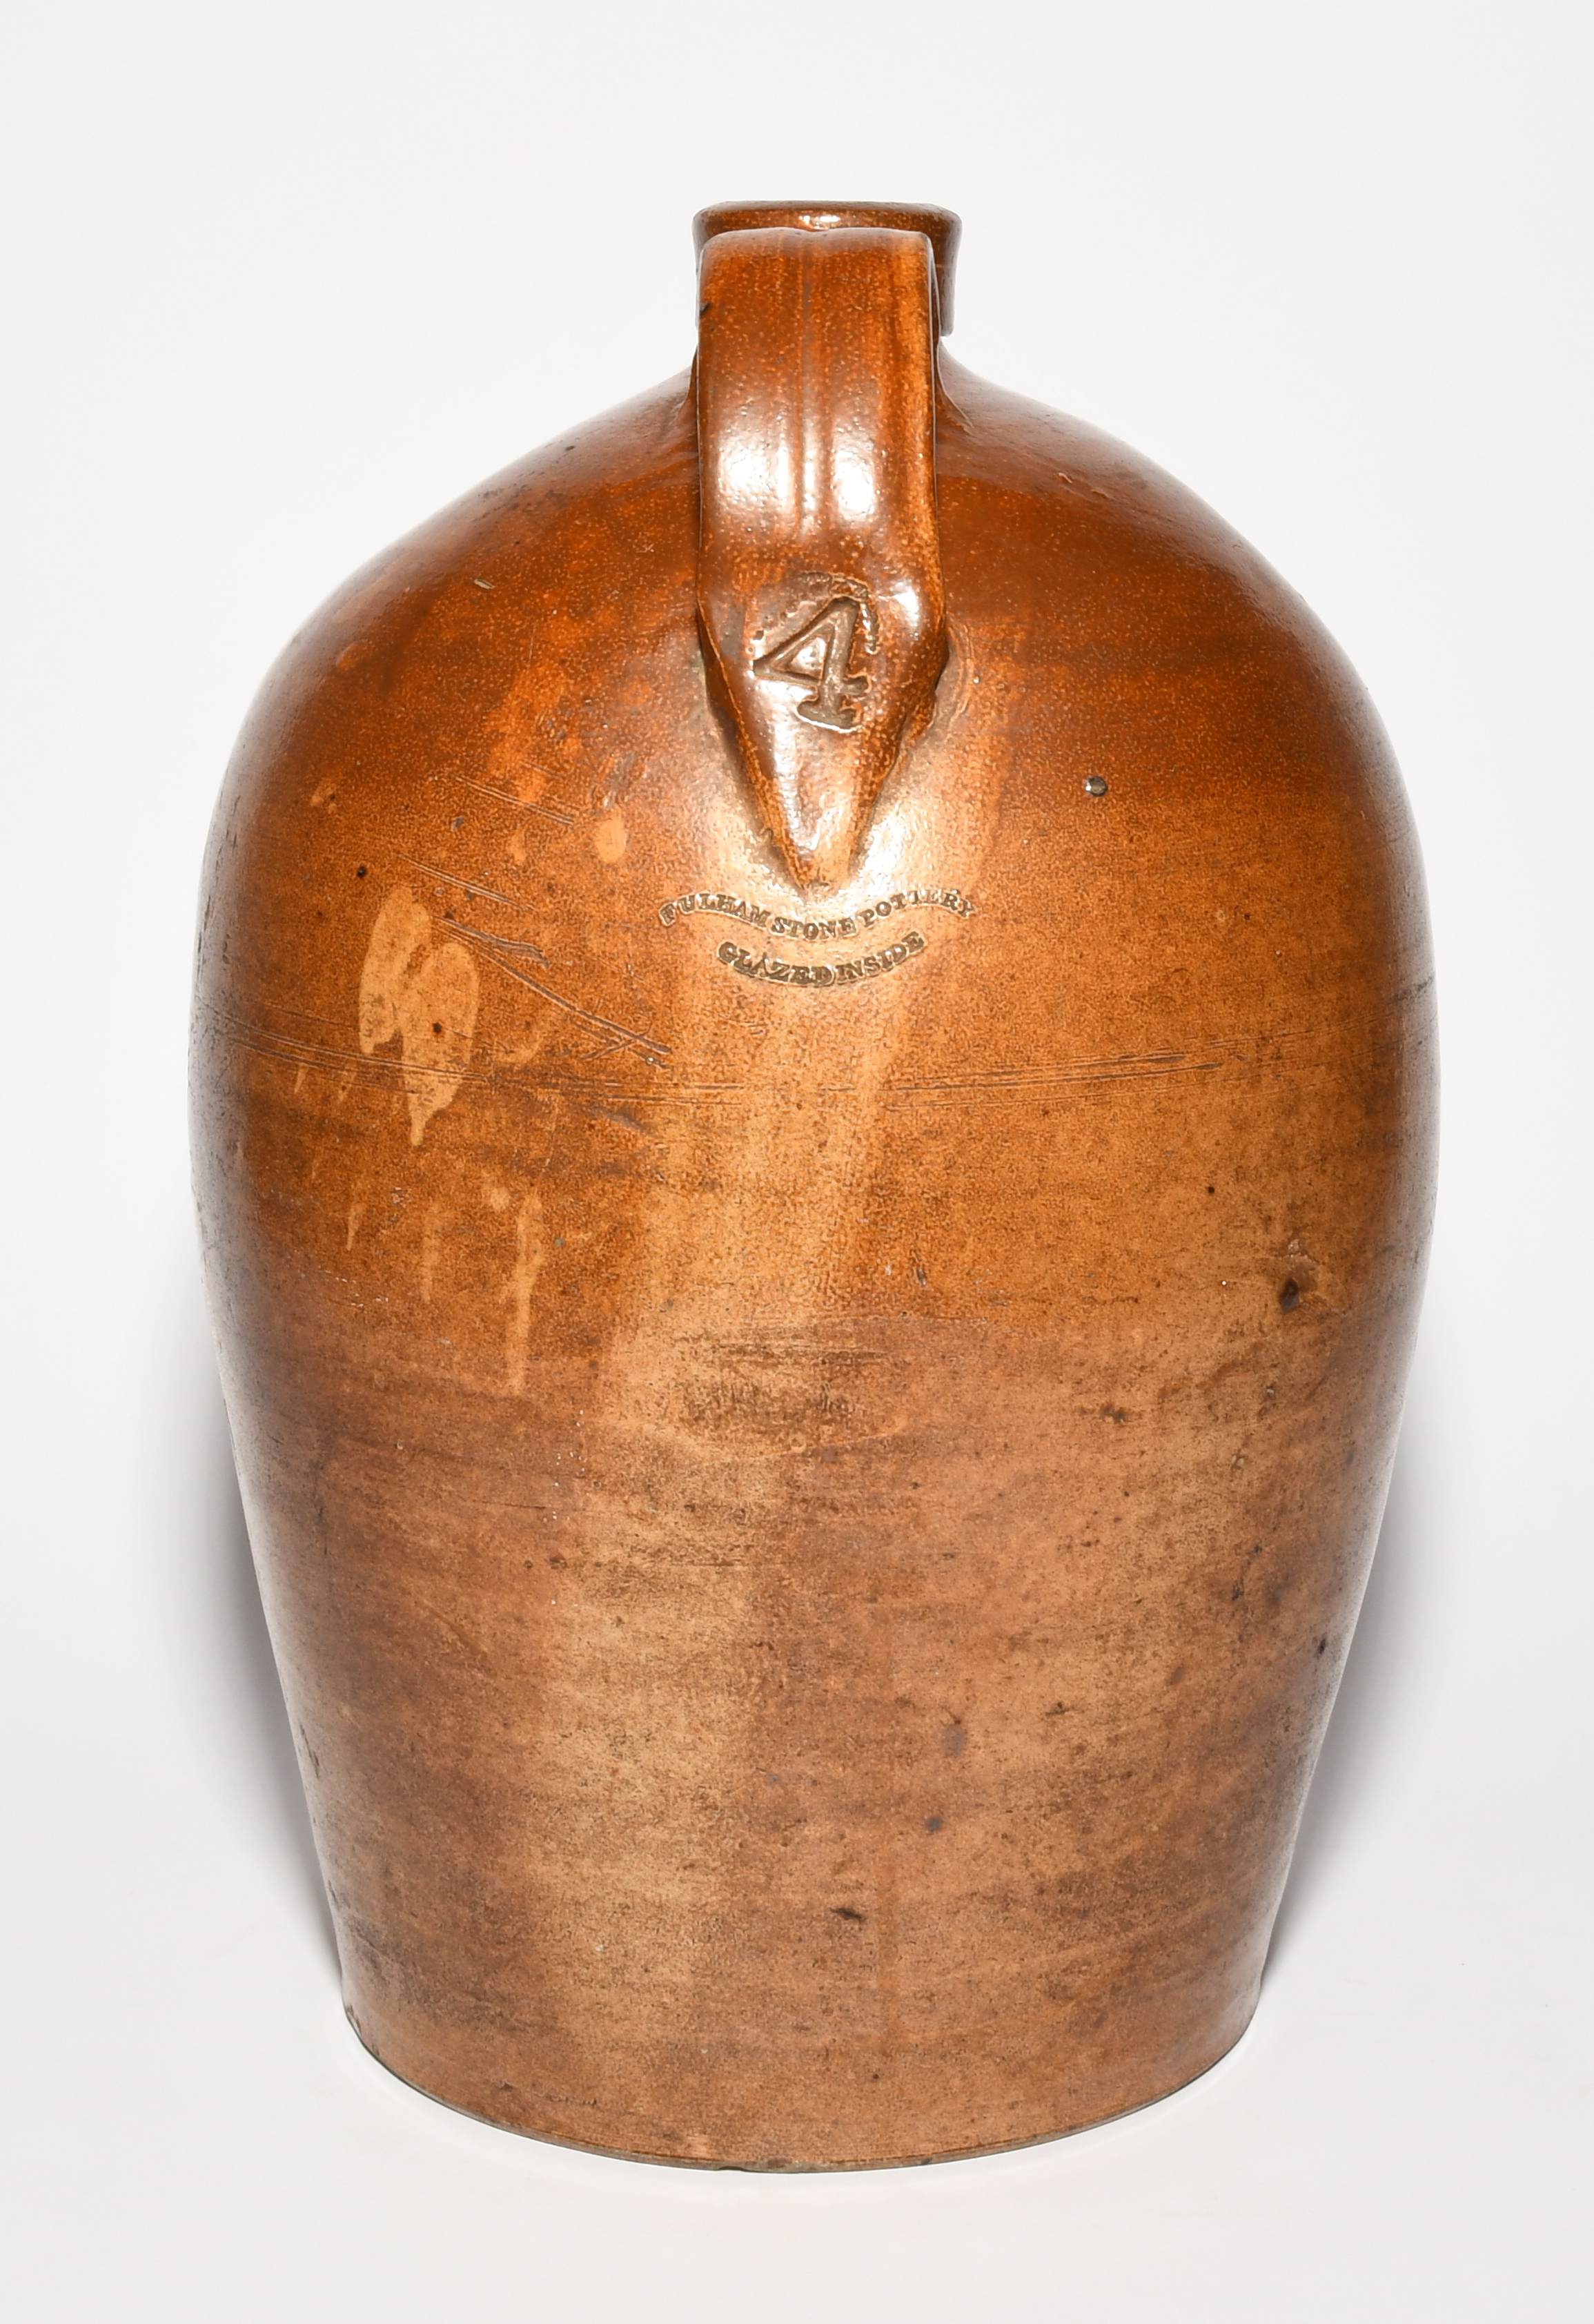 A large Fulham stoneware flagon or serving bottle, mid 19th century, of four gallon size, - Image 2 of 2